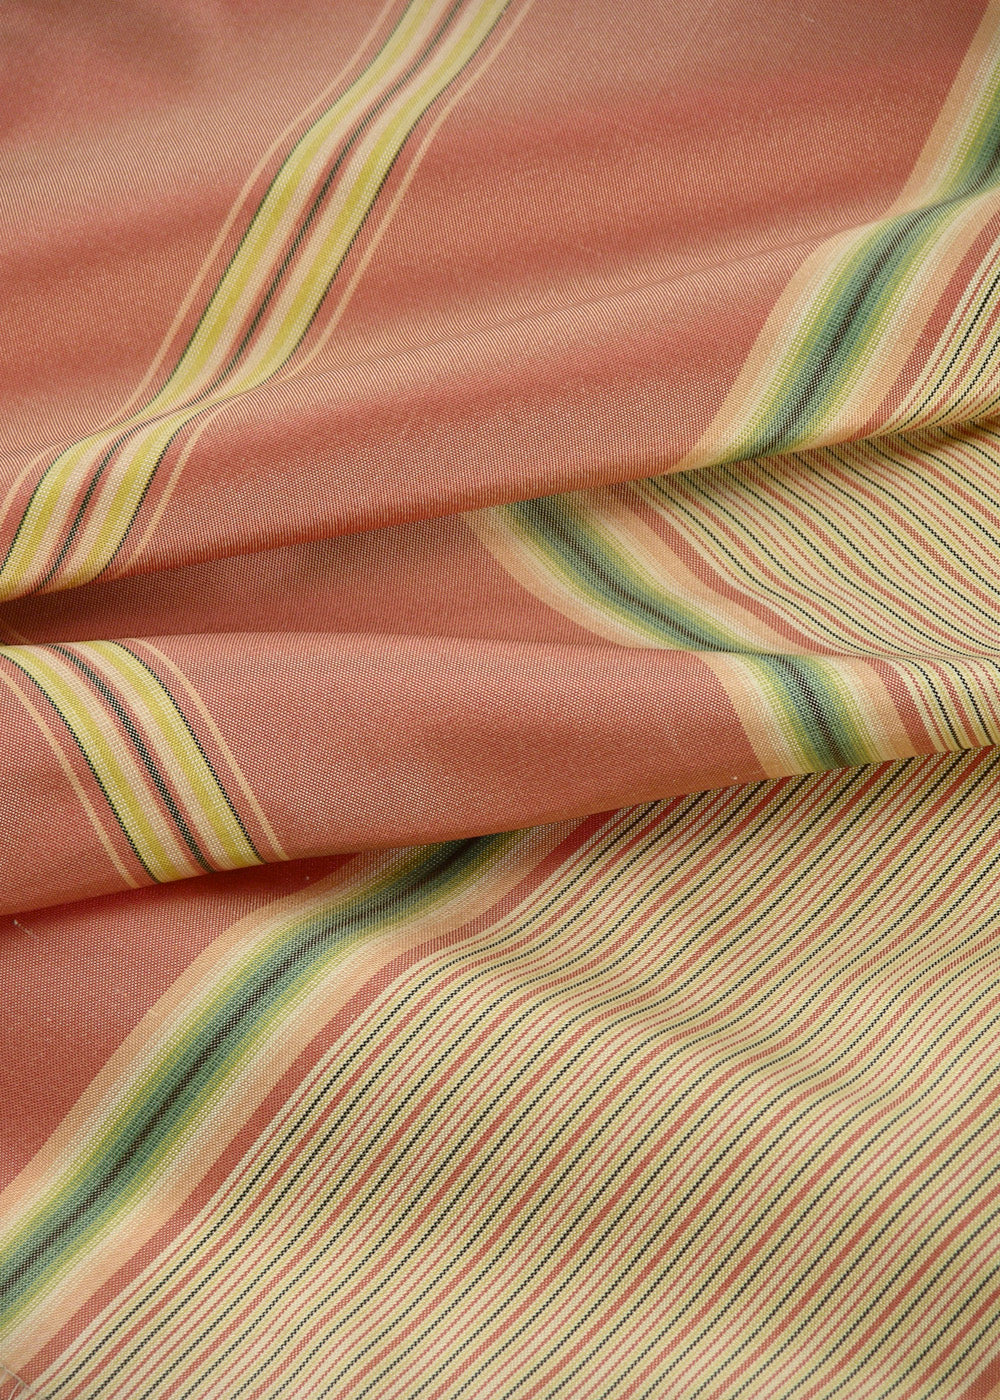 folded silk fabric with orange, yellow, and green stripes